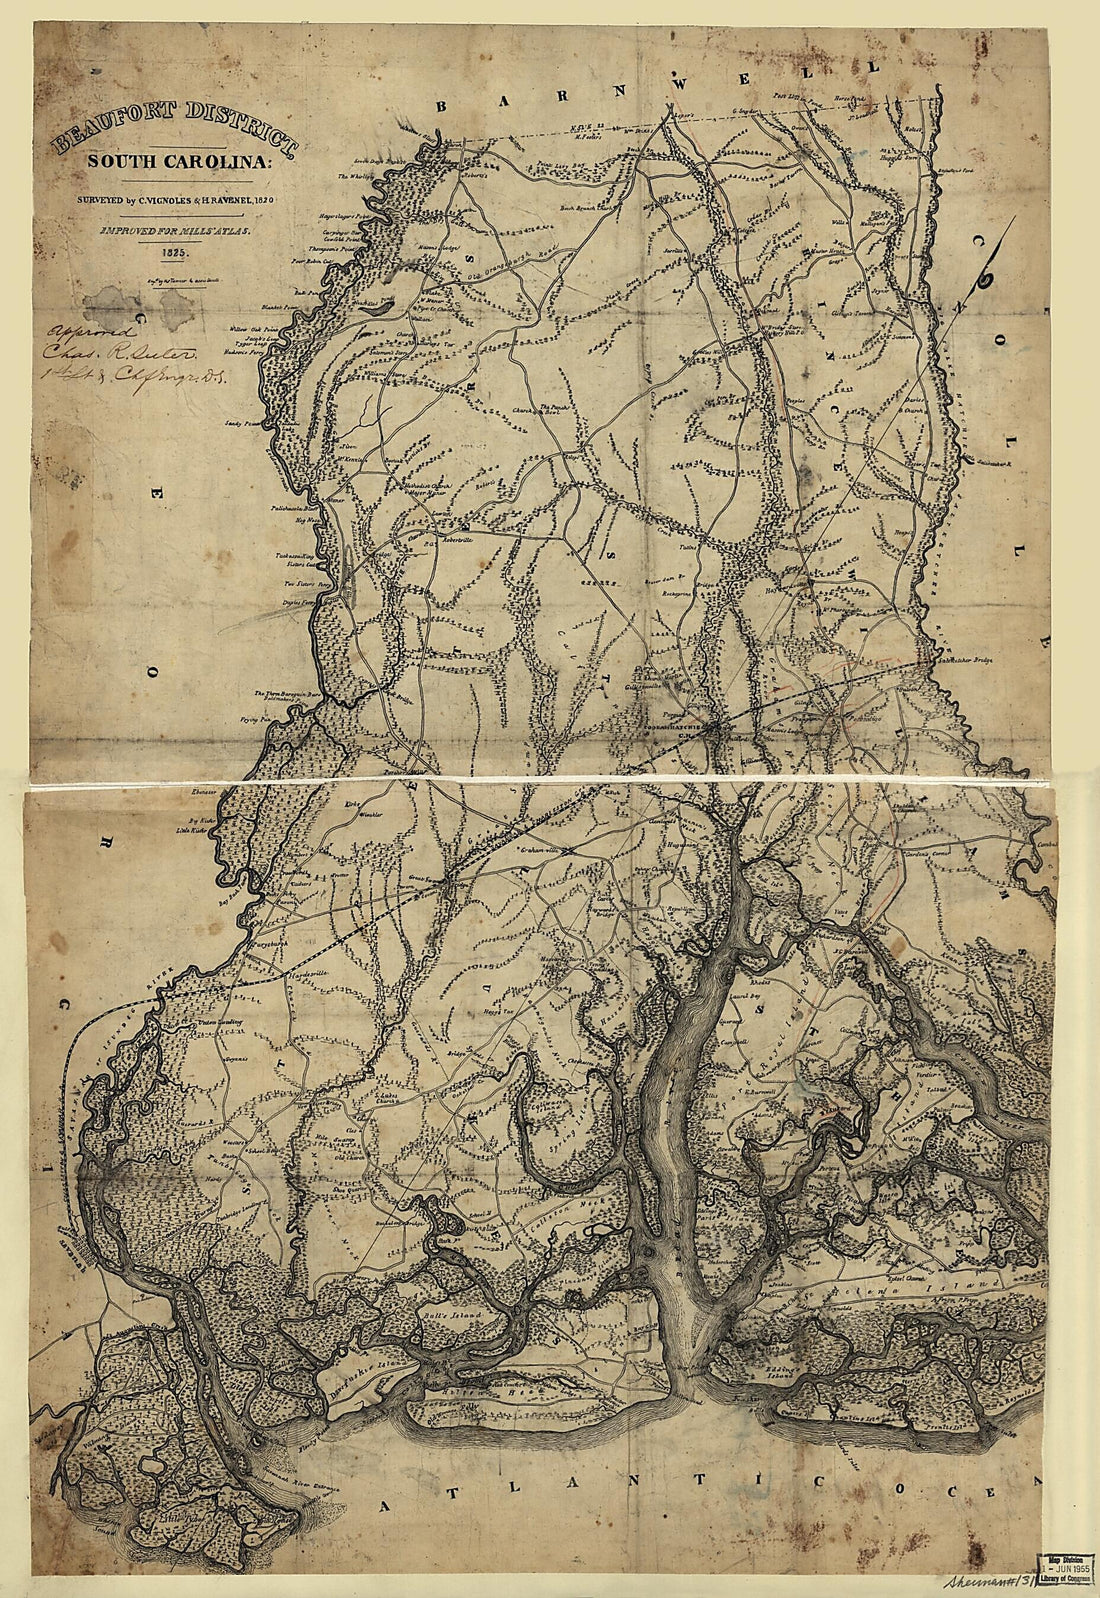 This old map of Beaufort District, South Carolina from 1825 was created by Robert Mills, Henry Ravenel, Charles Blacker Vignoles in 1825